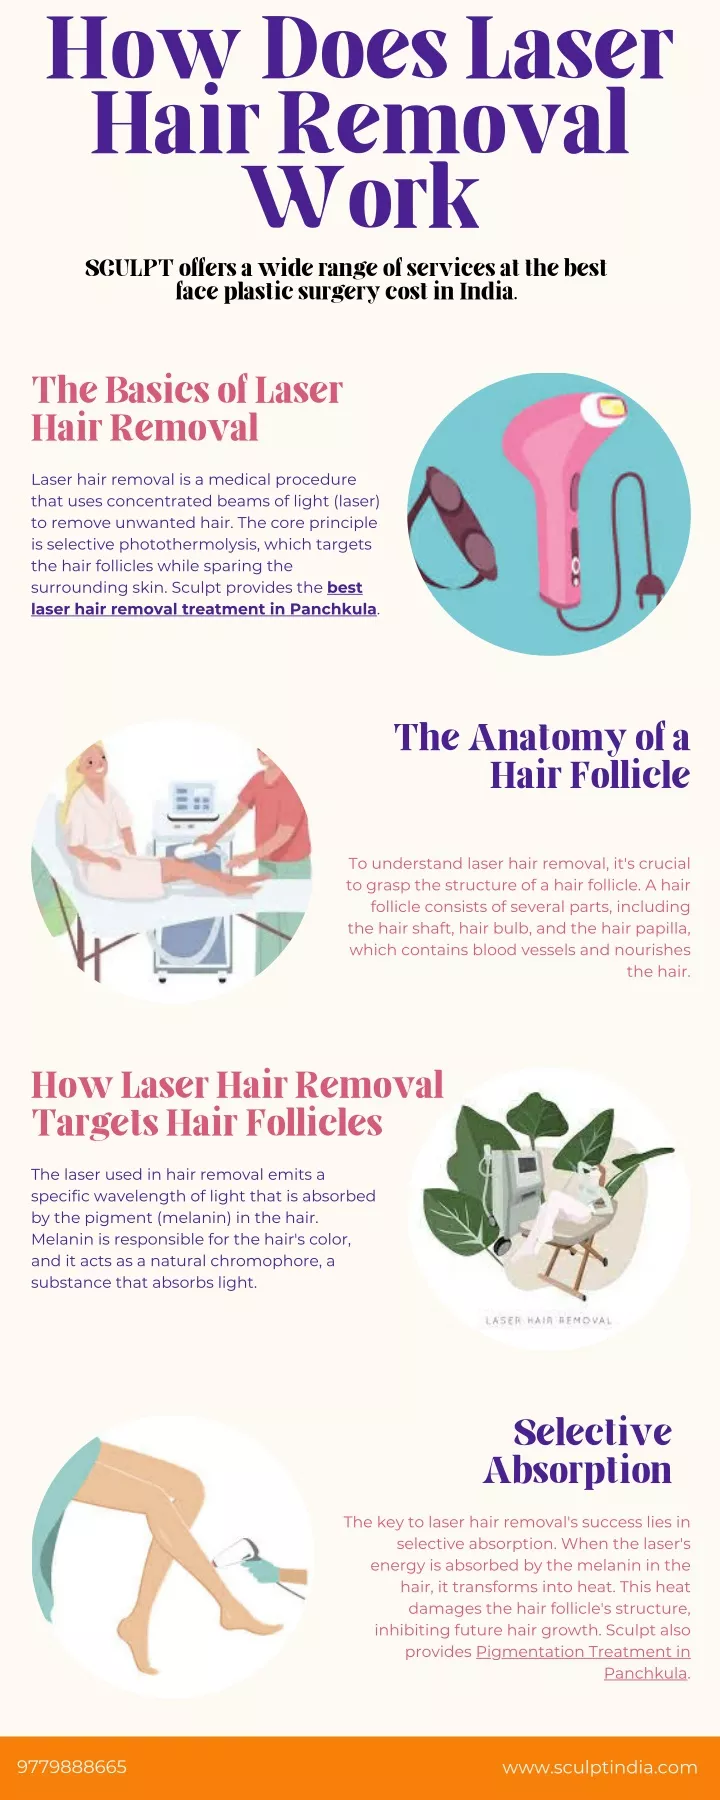 how does laser hair removal work sculpt offers